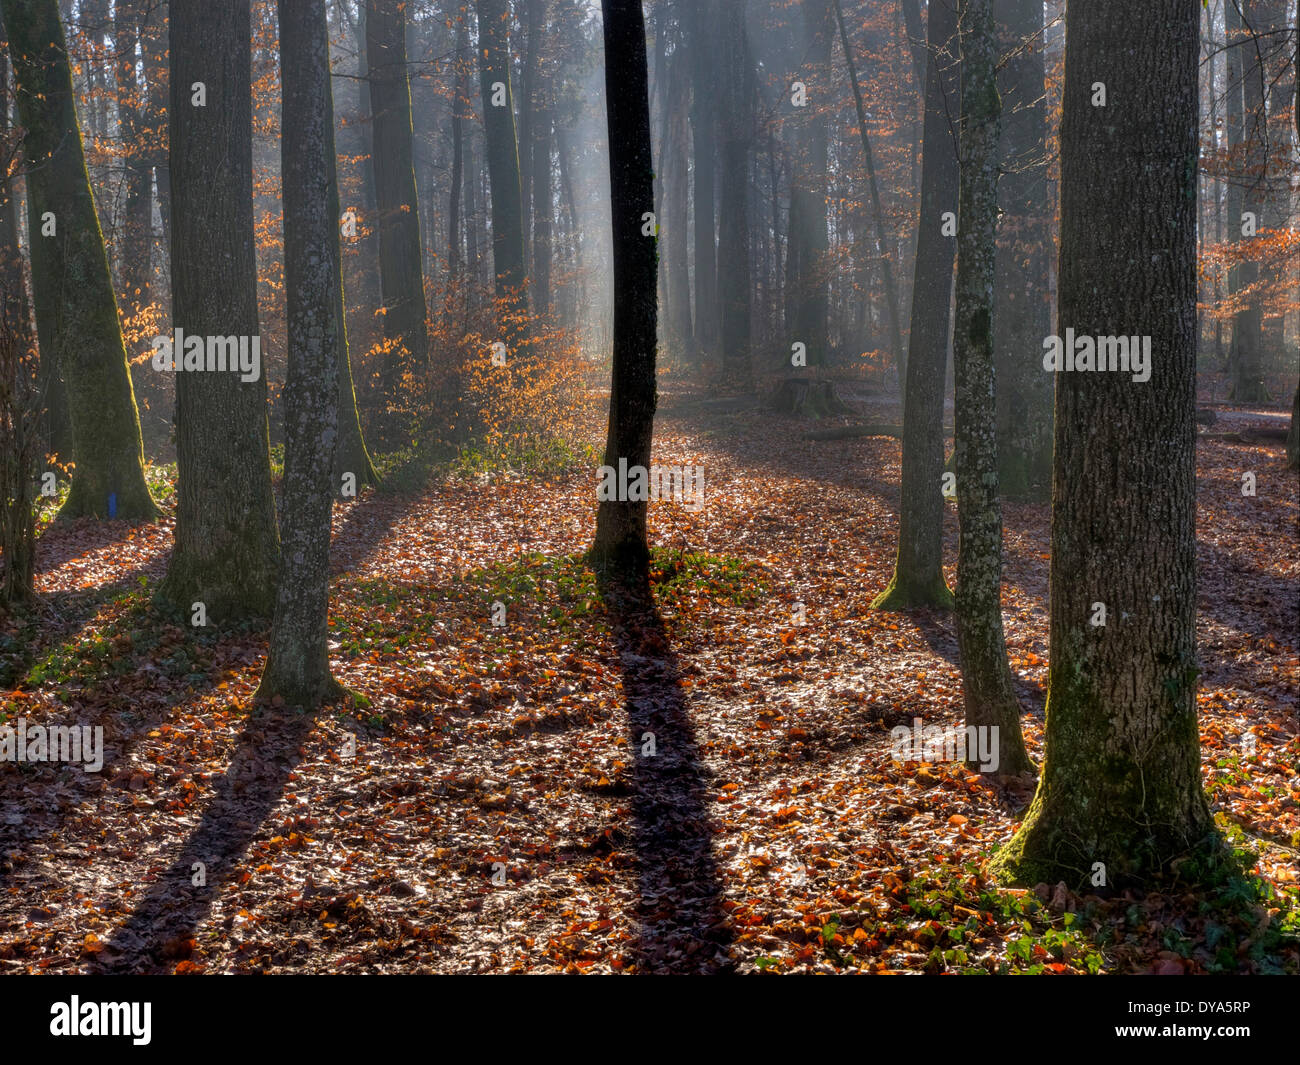 Switzerland, Europe, canton Zurich, leaves, wood, forest, beeches, autumn, contrast, light, shade, sun, foliage Stock Photo